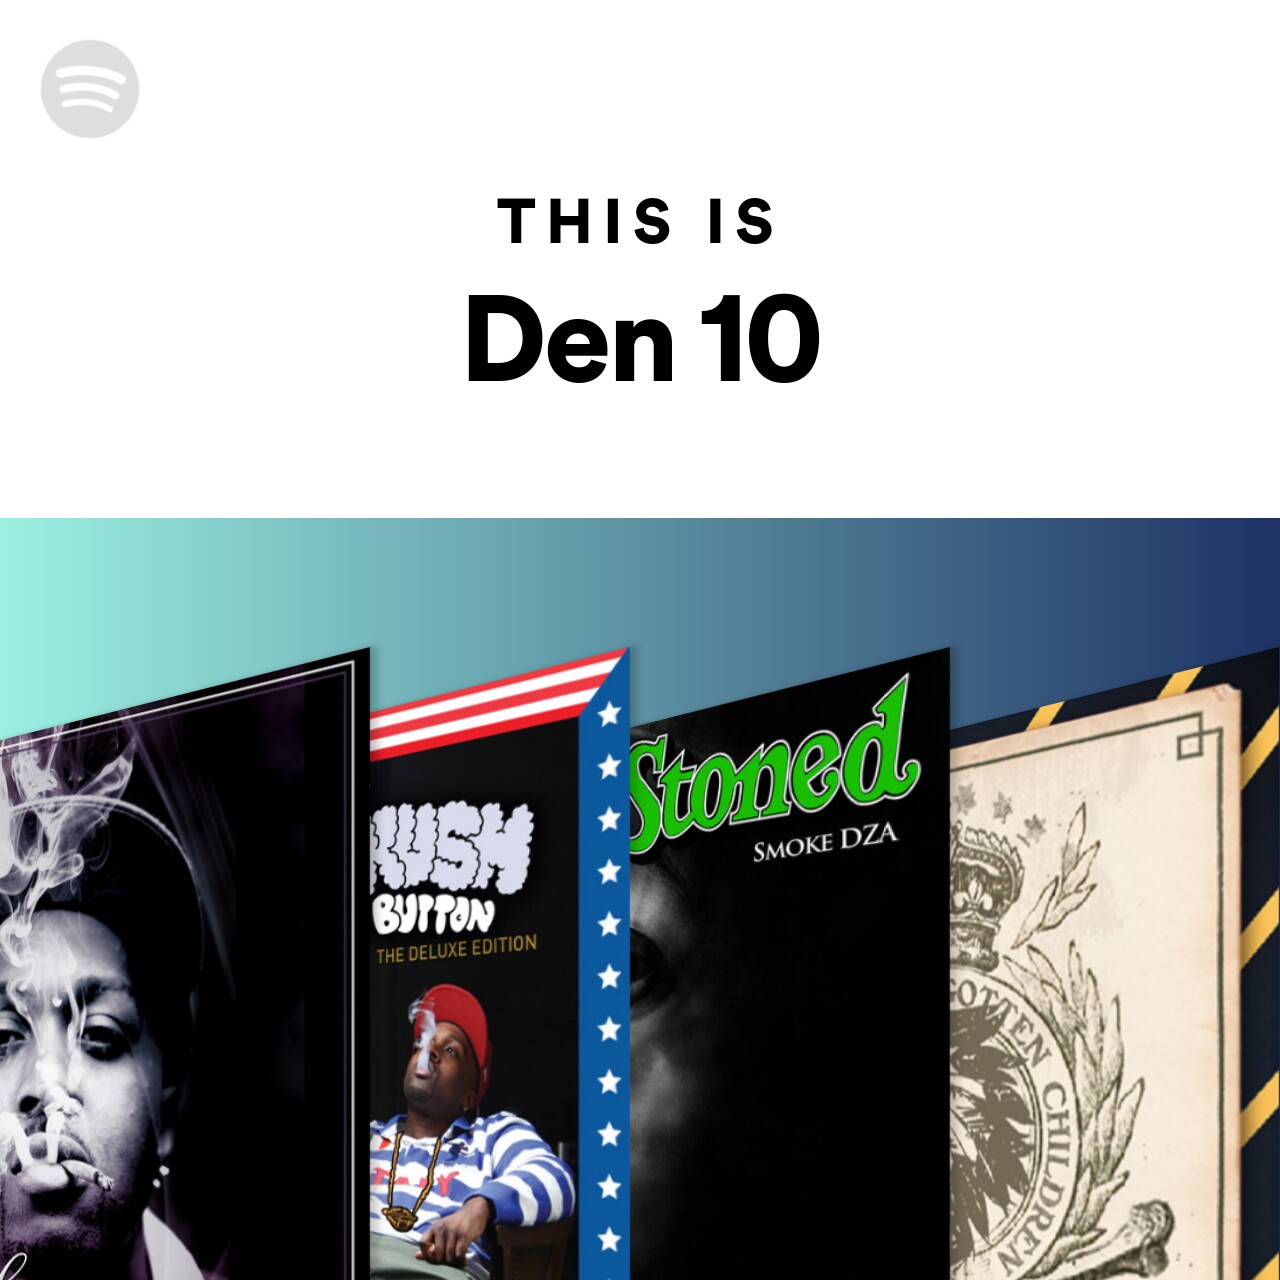 This Is Den 10